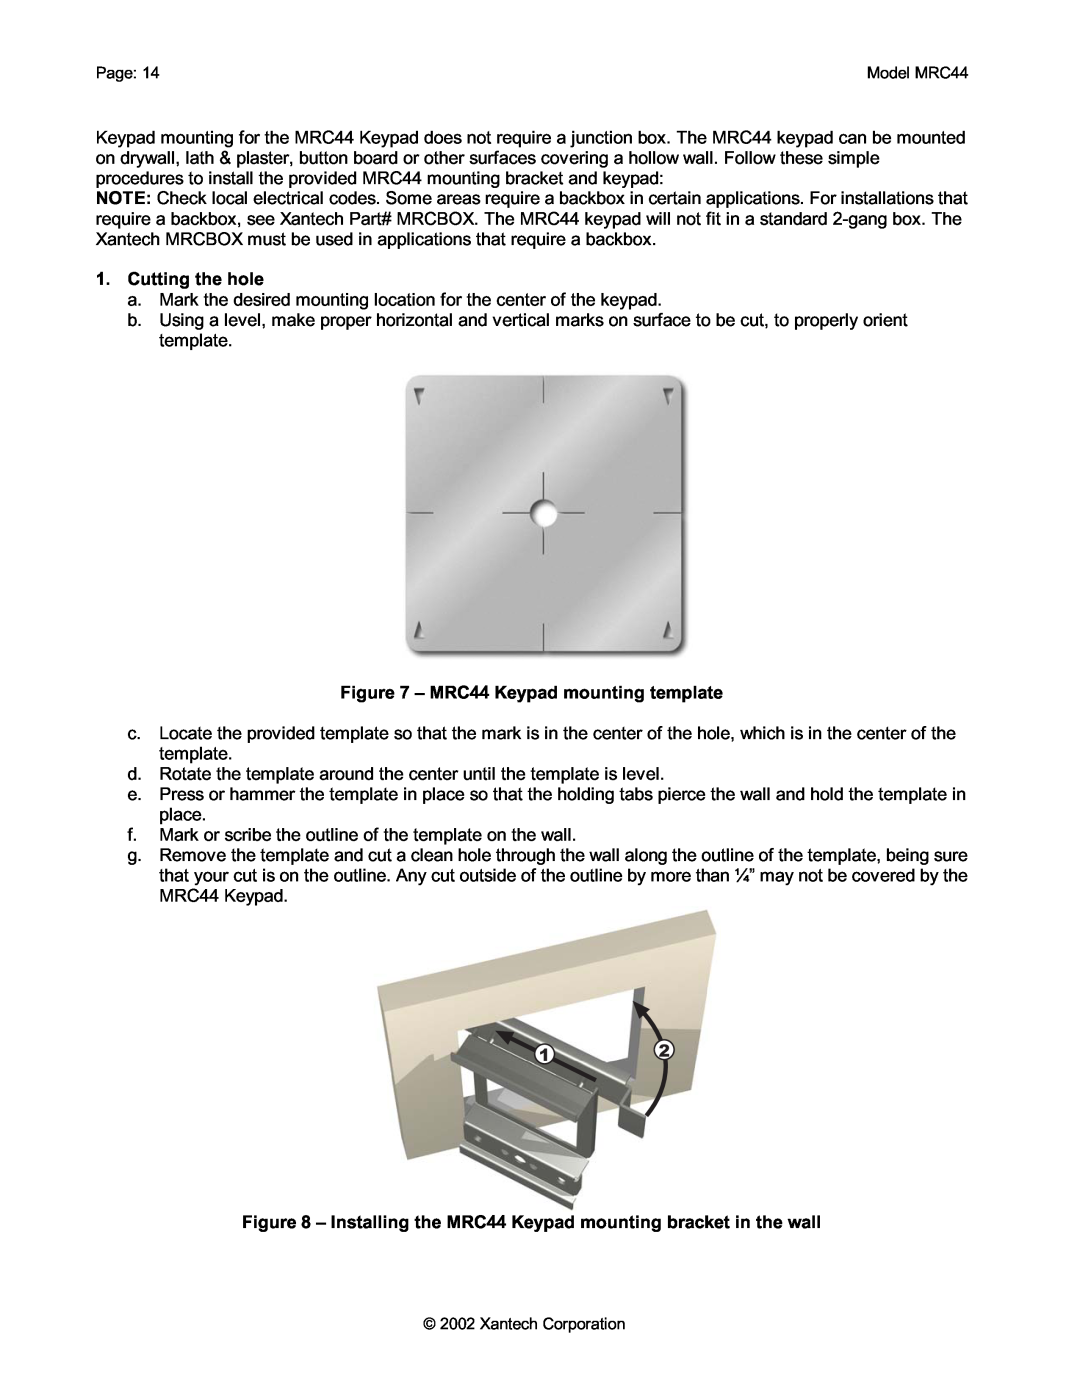 Xantech installation instructions Cutting the hole, MRC44 Keypad mounting template 